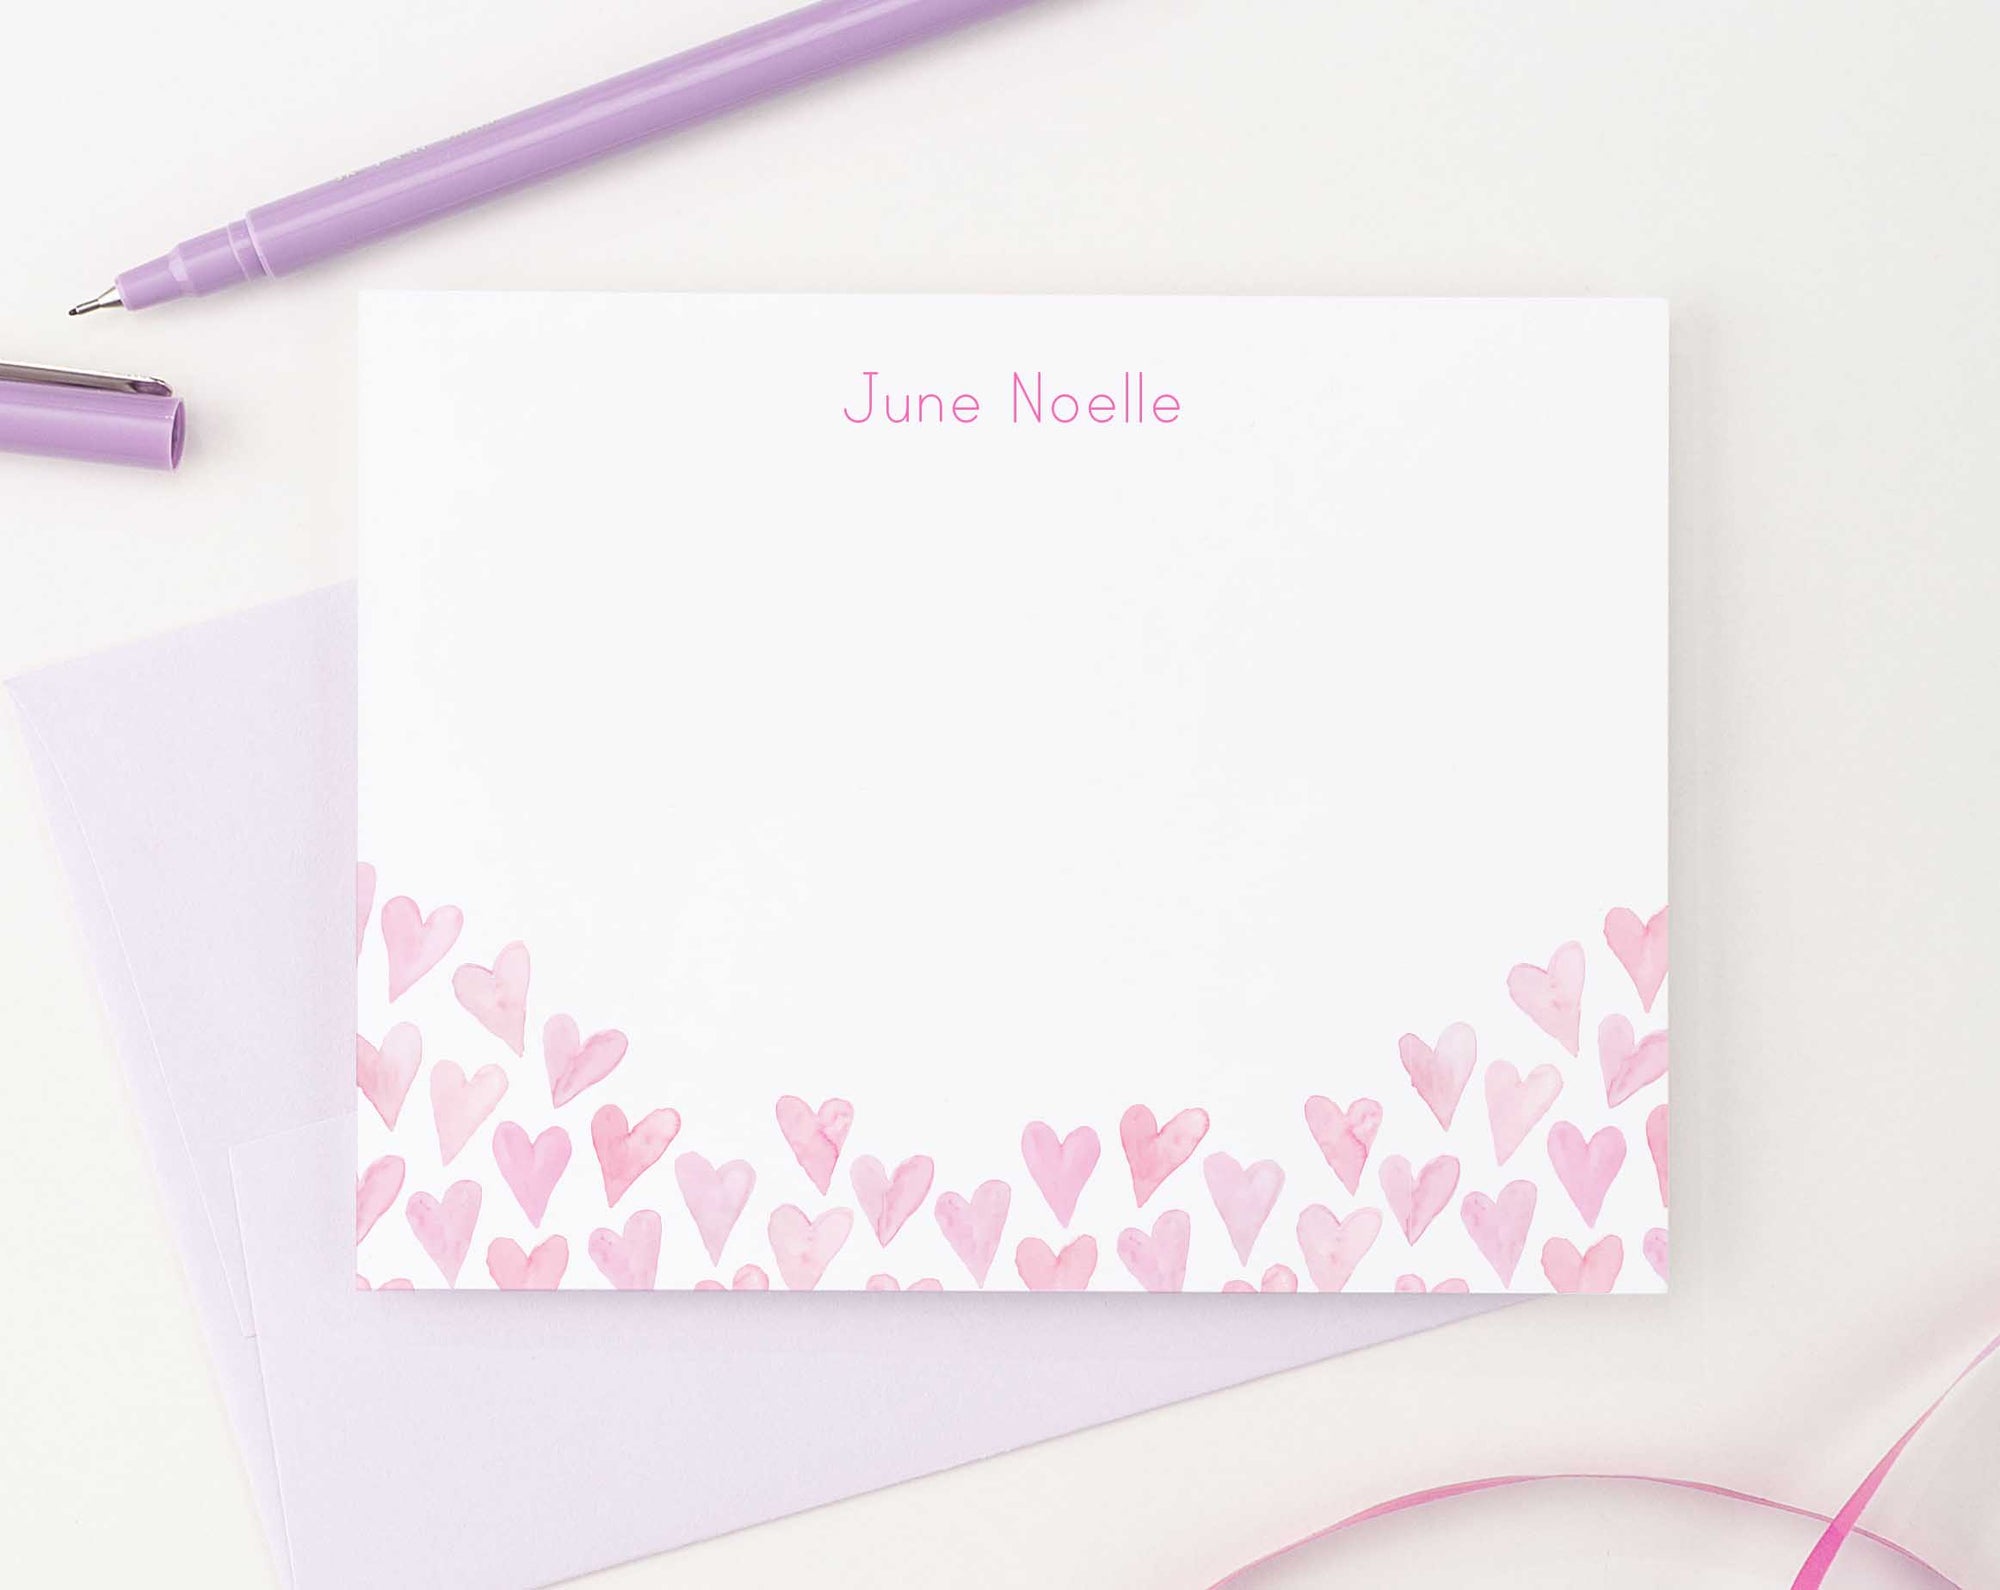  Stationary Personalized with Name for Teen Girls, A2 FLAT  Notecards, Choose Quantity and Colors, Heart Stationery for Teenage Girls,  Personal Note Cards and Envelopes Set, Custom Name Gift for Women 